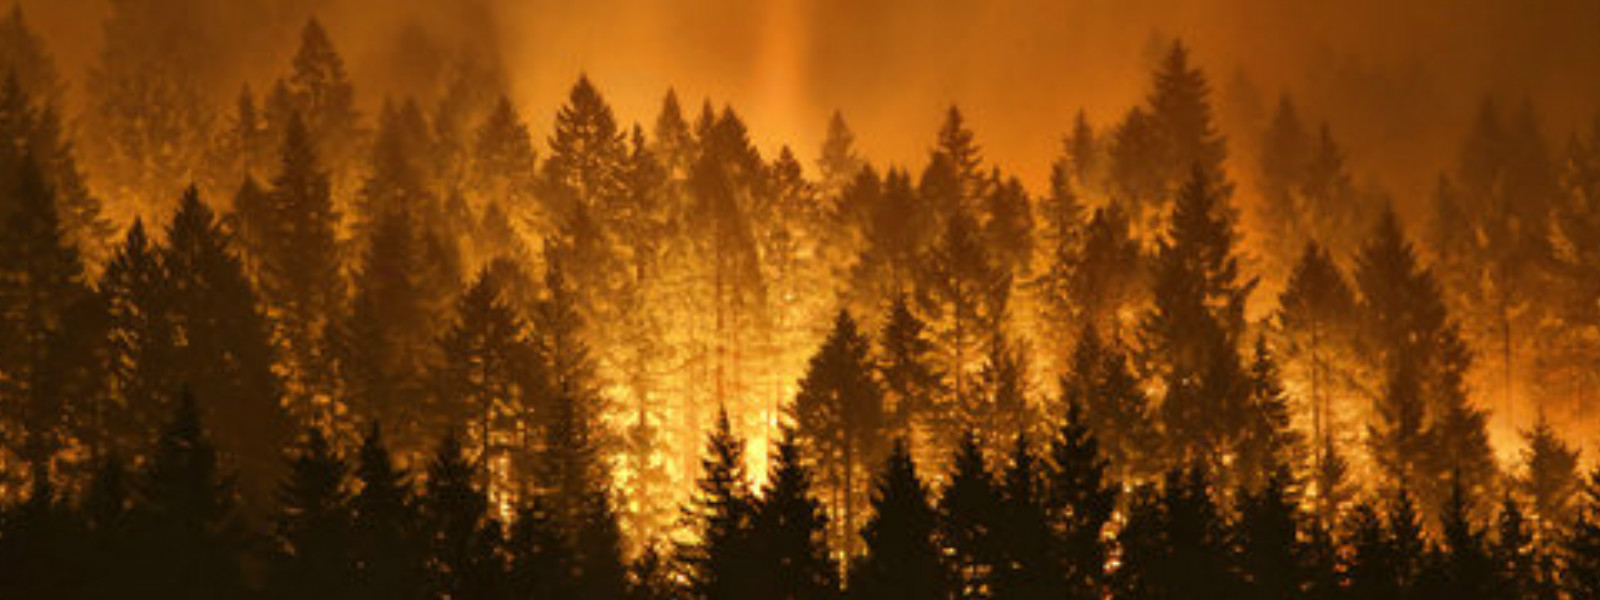 Wildfire ravages parts of Oregon